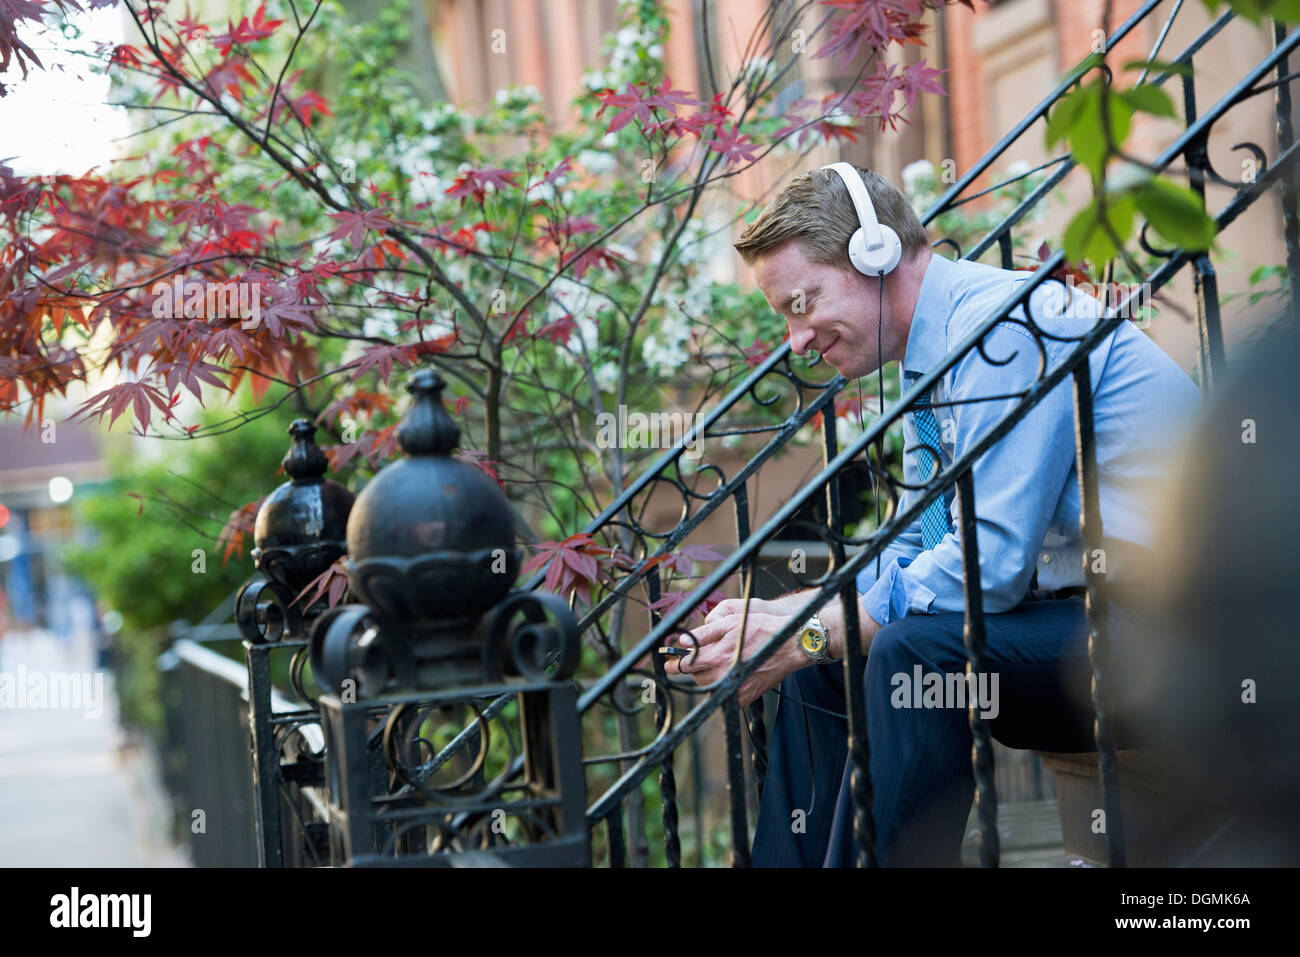 A man in a blue shirt wearing headphones and listening to a music player. Stock Photo